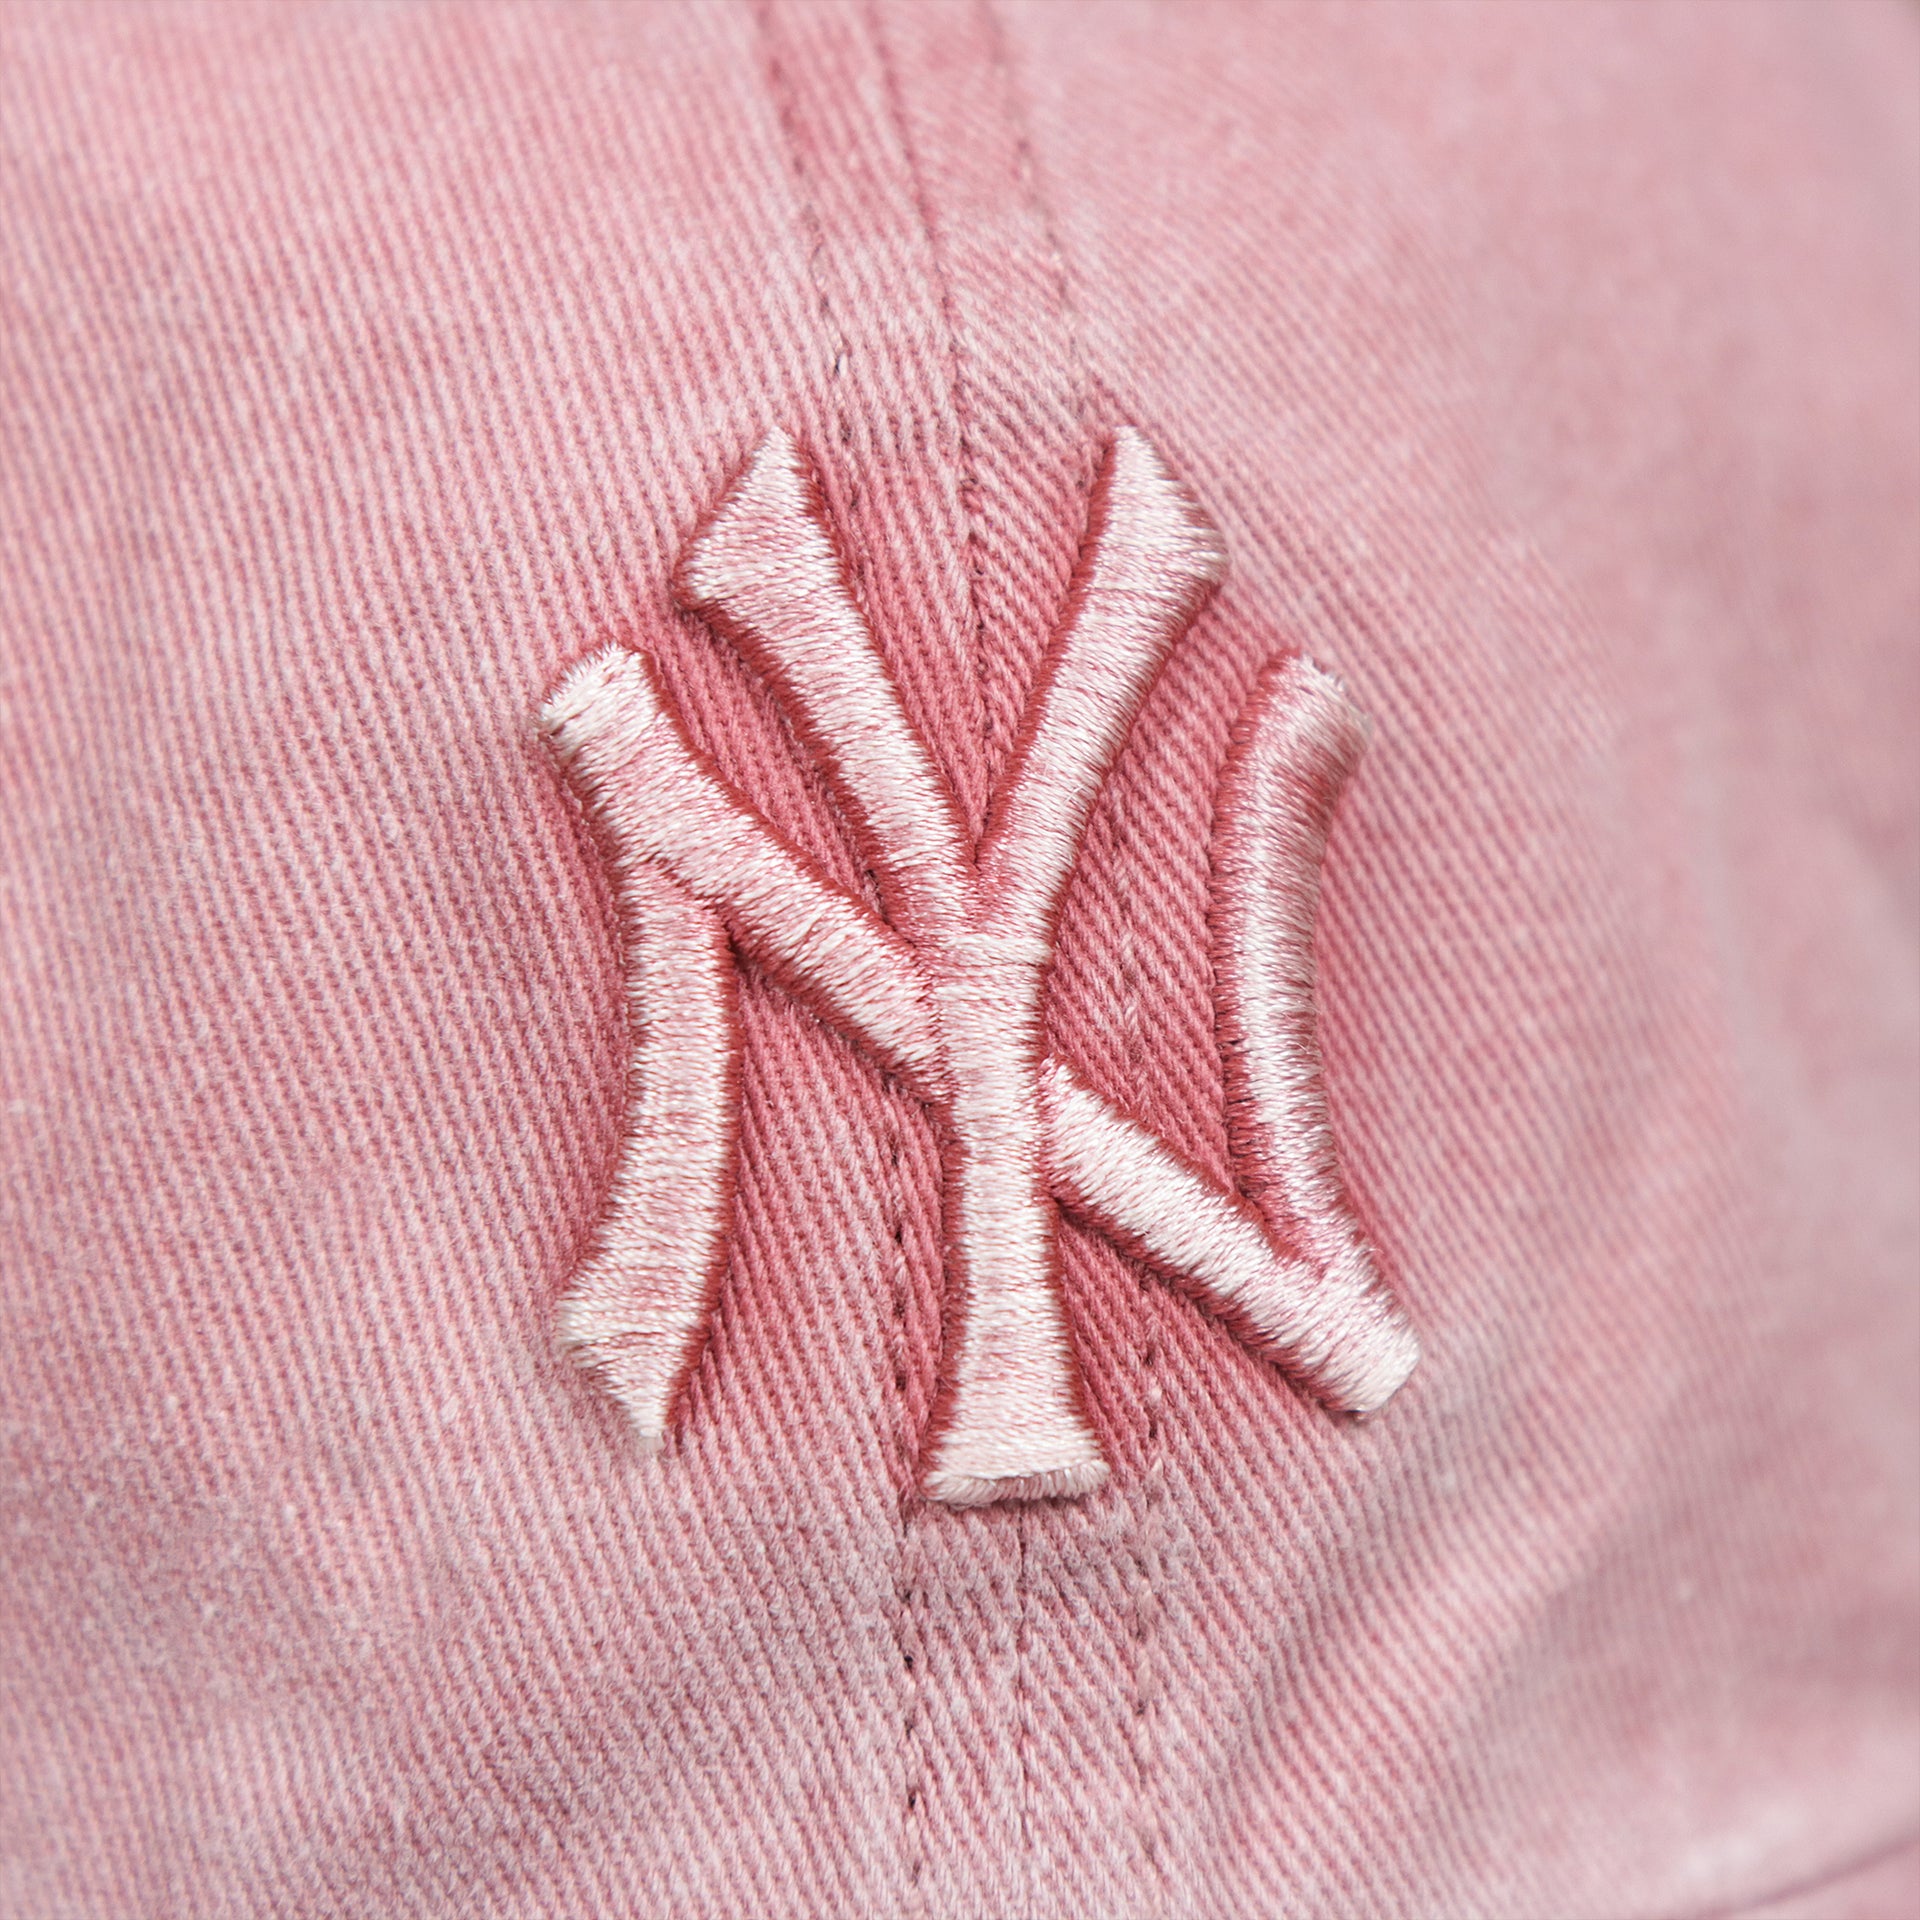 The Yankees Logo on the Women’s New York Yankees Gray Bottom Vintage Washed Dad Hat | Vintage Pink Women’s Dad Hat